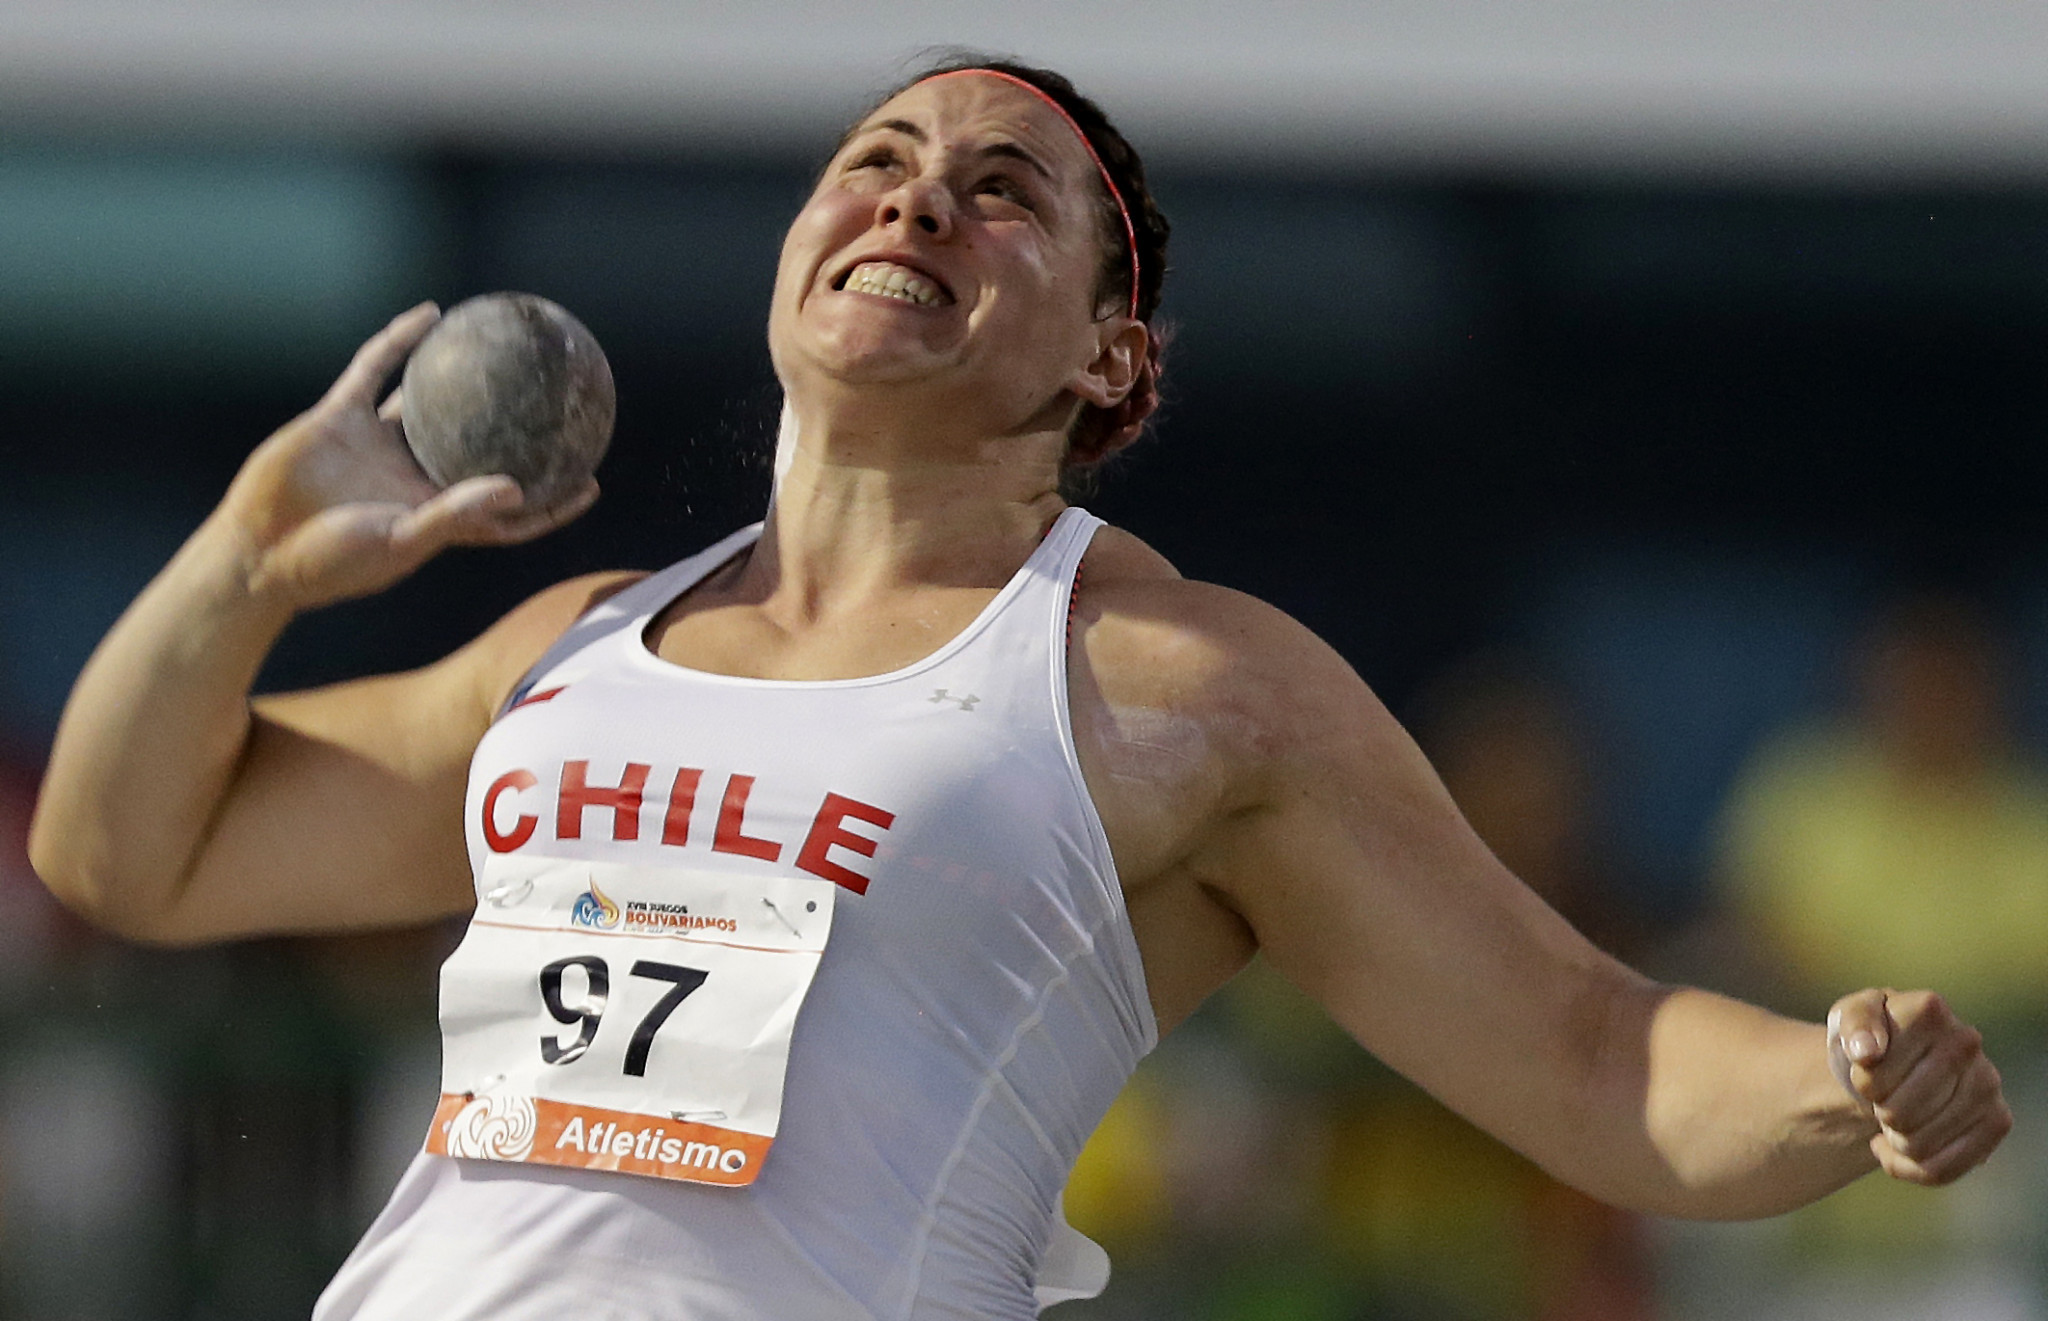 Chilean shot putter Natalia Duco has been provisionally suspended having tested positive for a banned substance in April ©Getty Images